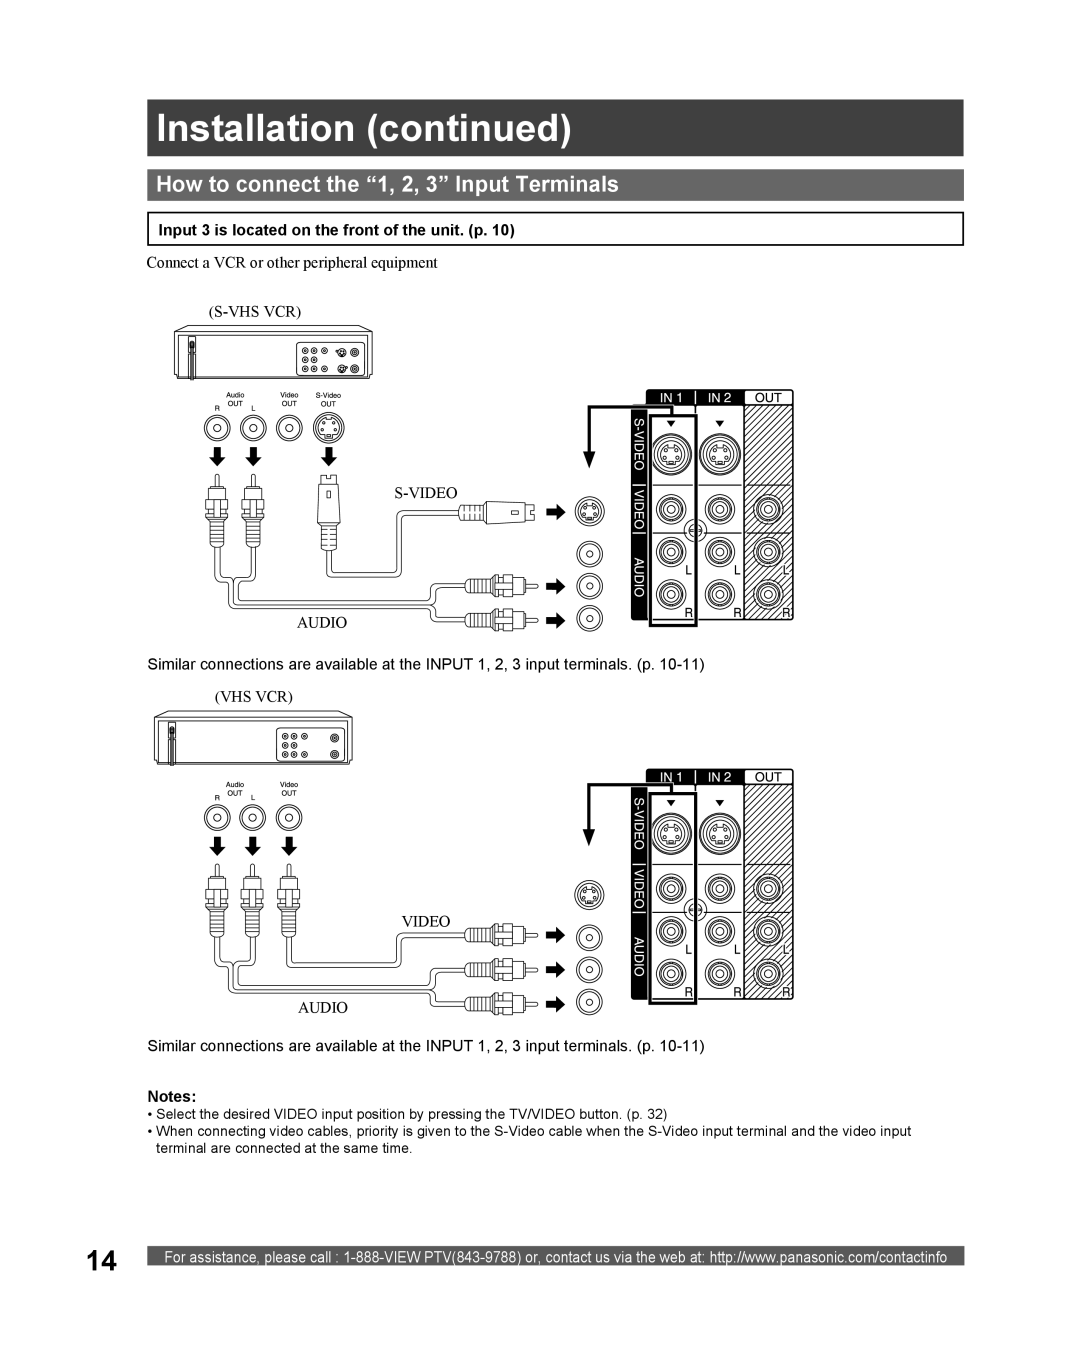 Panasonic PT-56LCX16, PT-61LCX16, PT-52LCX16 manual Installation continued, How to connect the “1, 2, 3” Input Terminals 